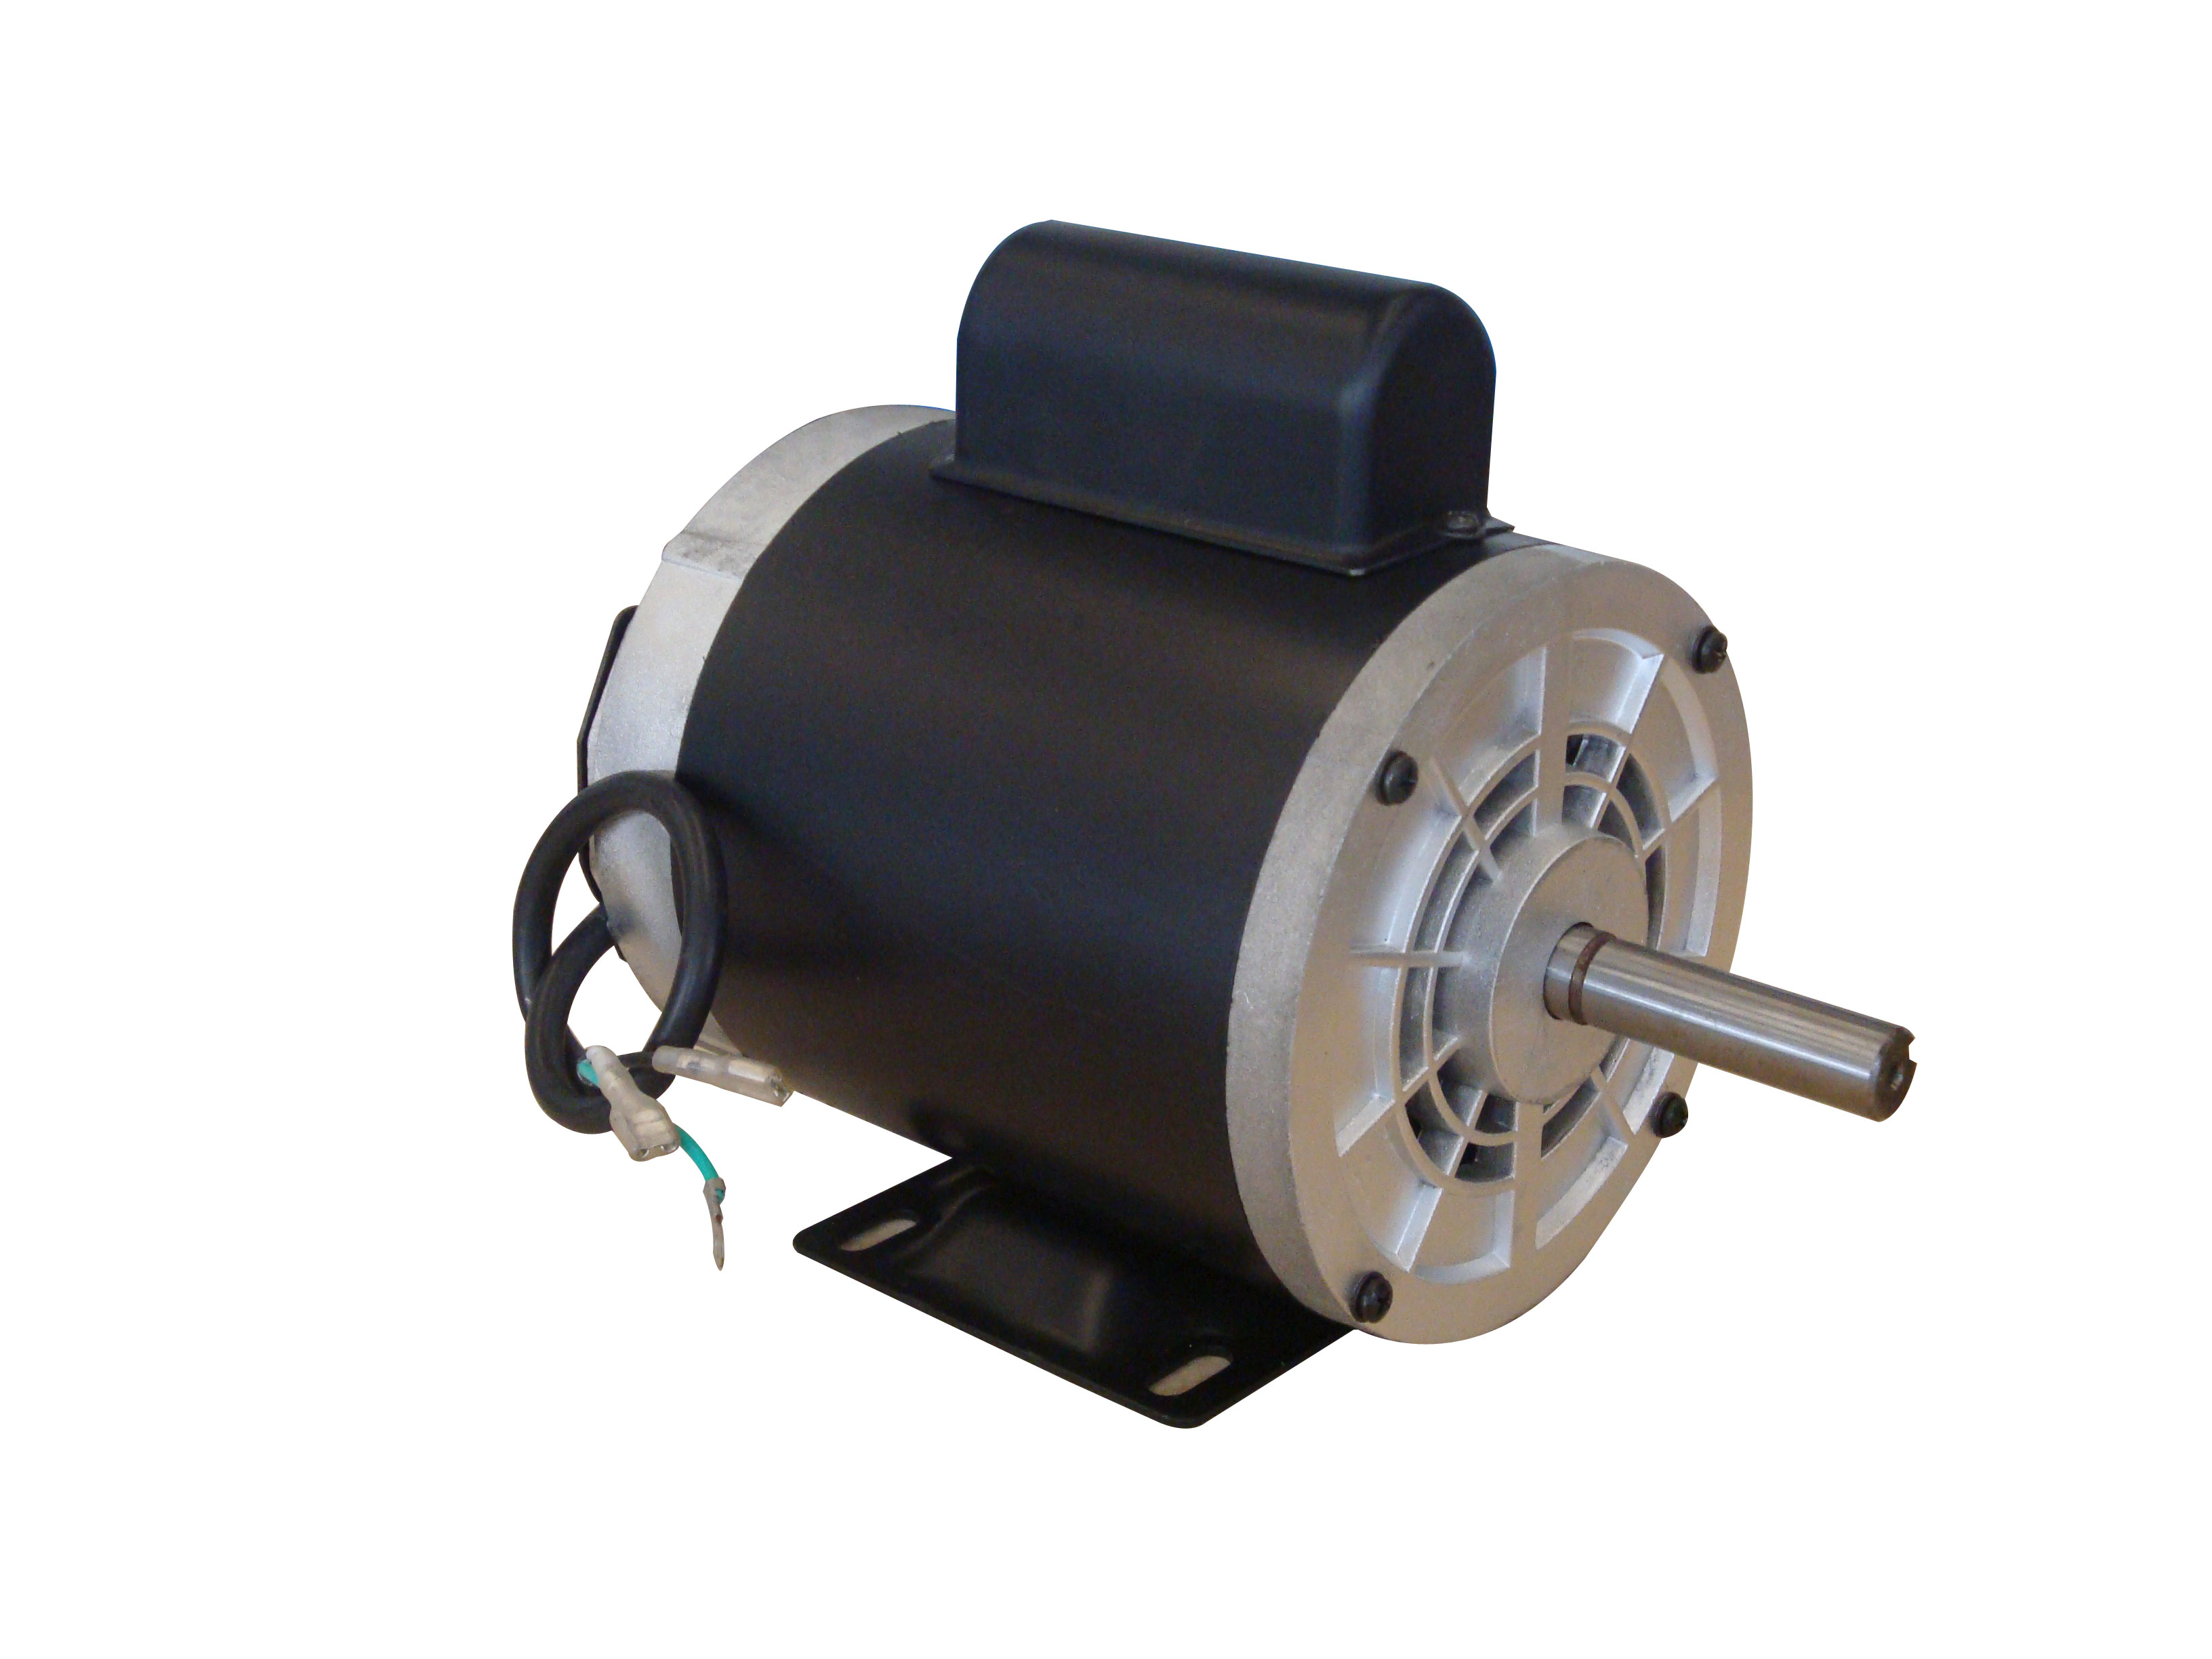 0.25 KW Meat Band Saw Motor